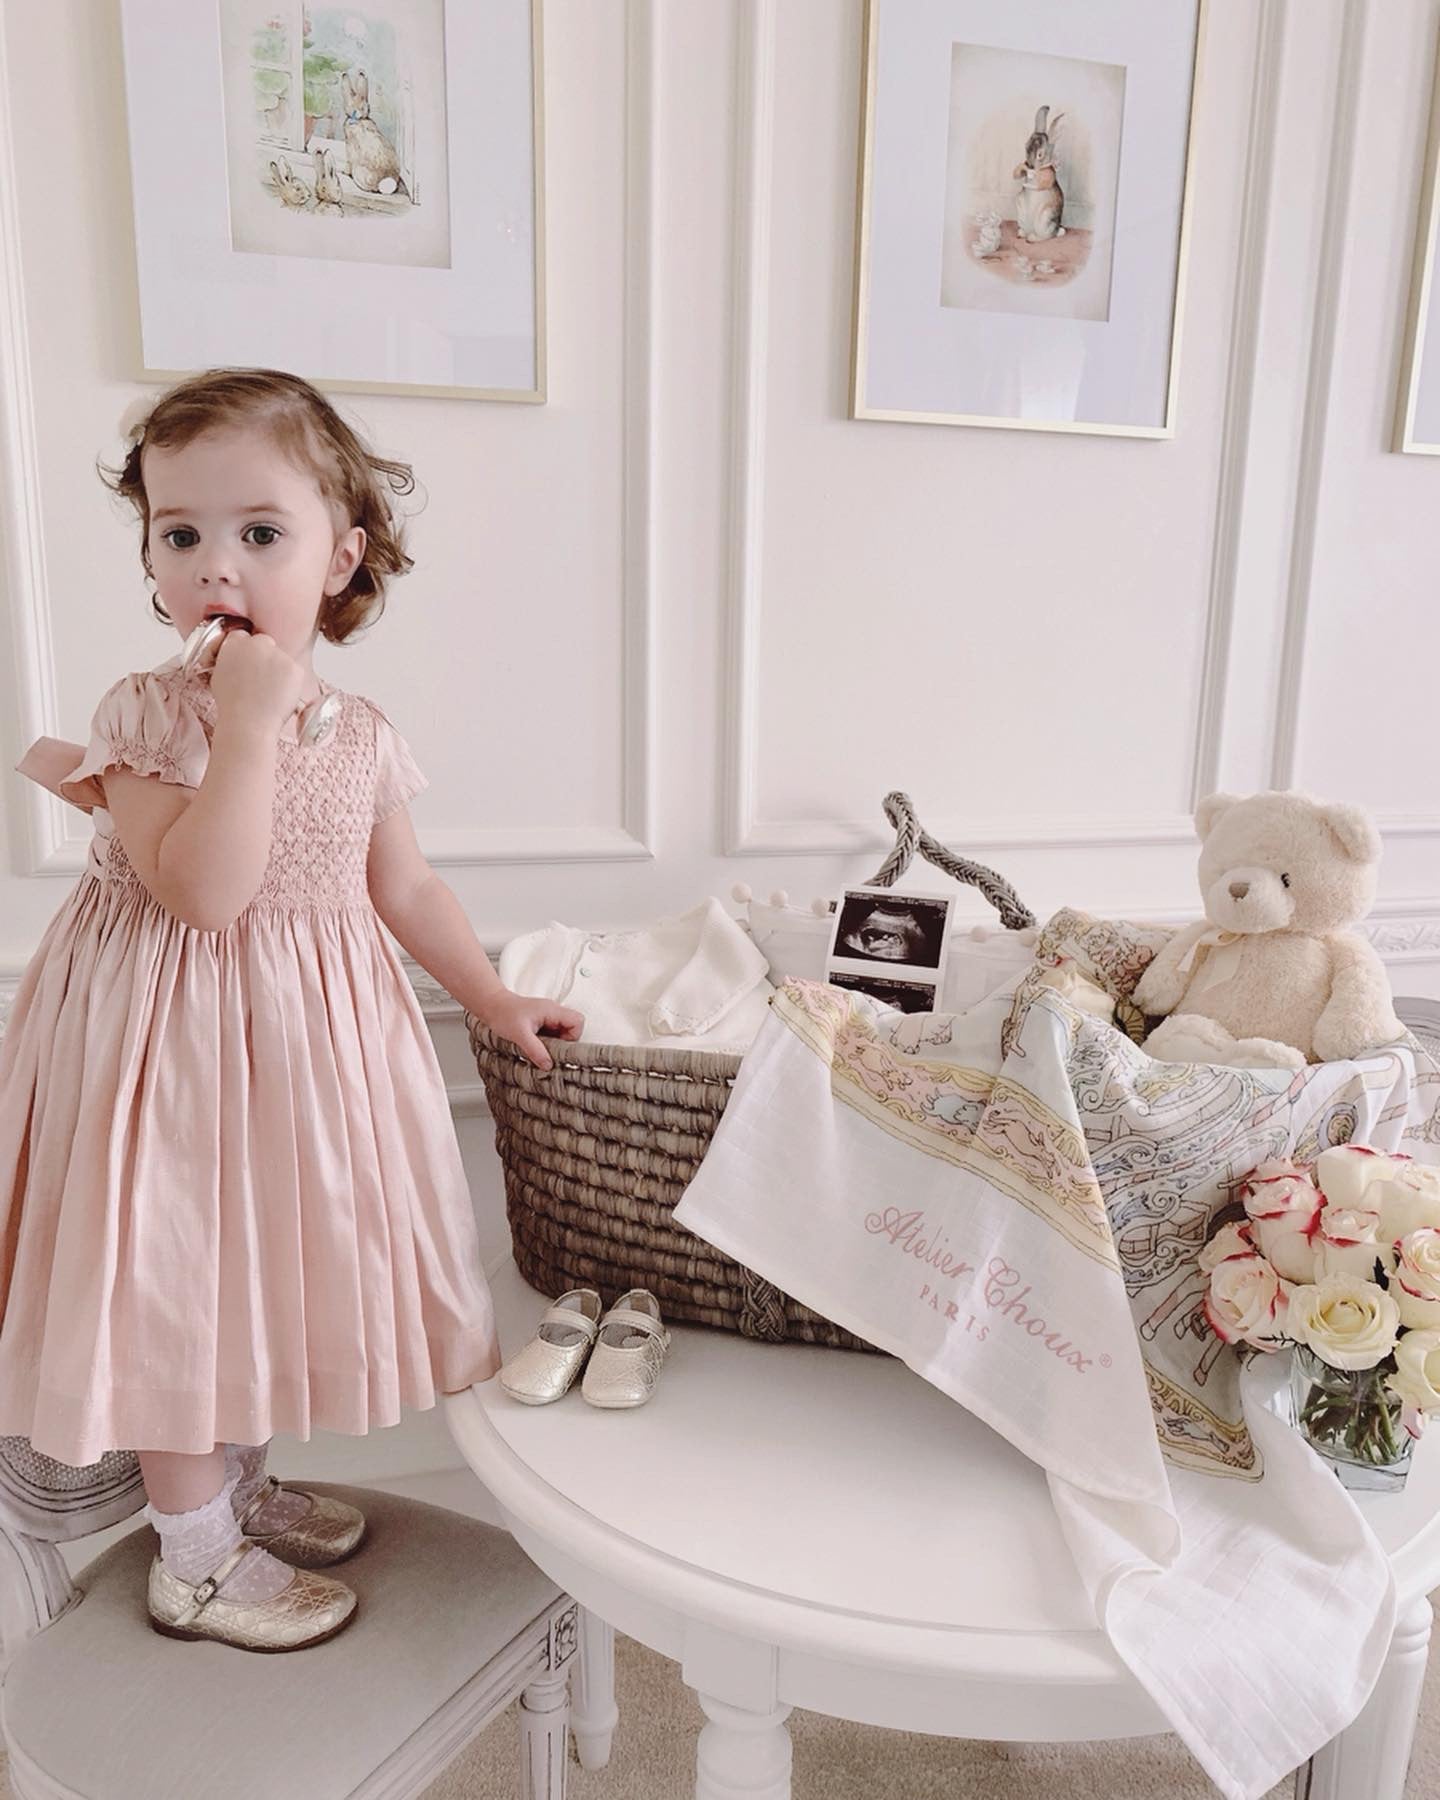 Children’s fashion : how to dress a little girl - Charlotte sy Dimby